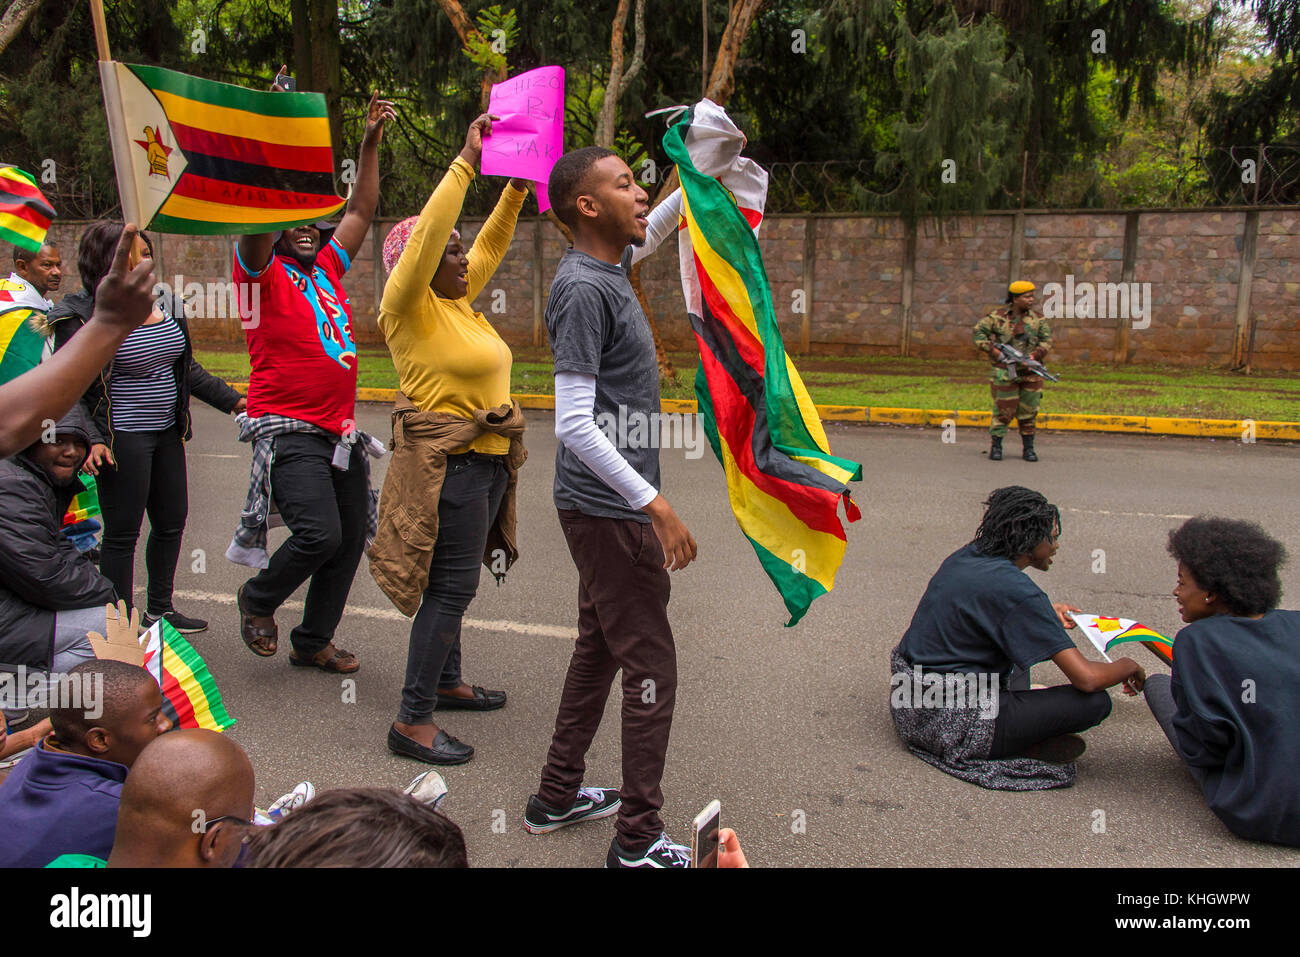 Harare Zimbabwe 17th November 2017 Zimbabweans Take To The Streets Of Harare To Protest And 